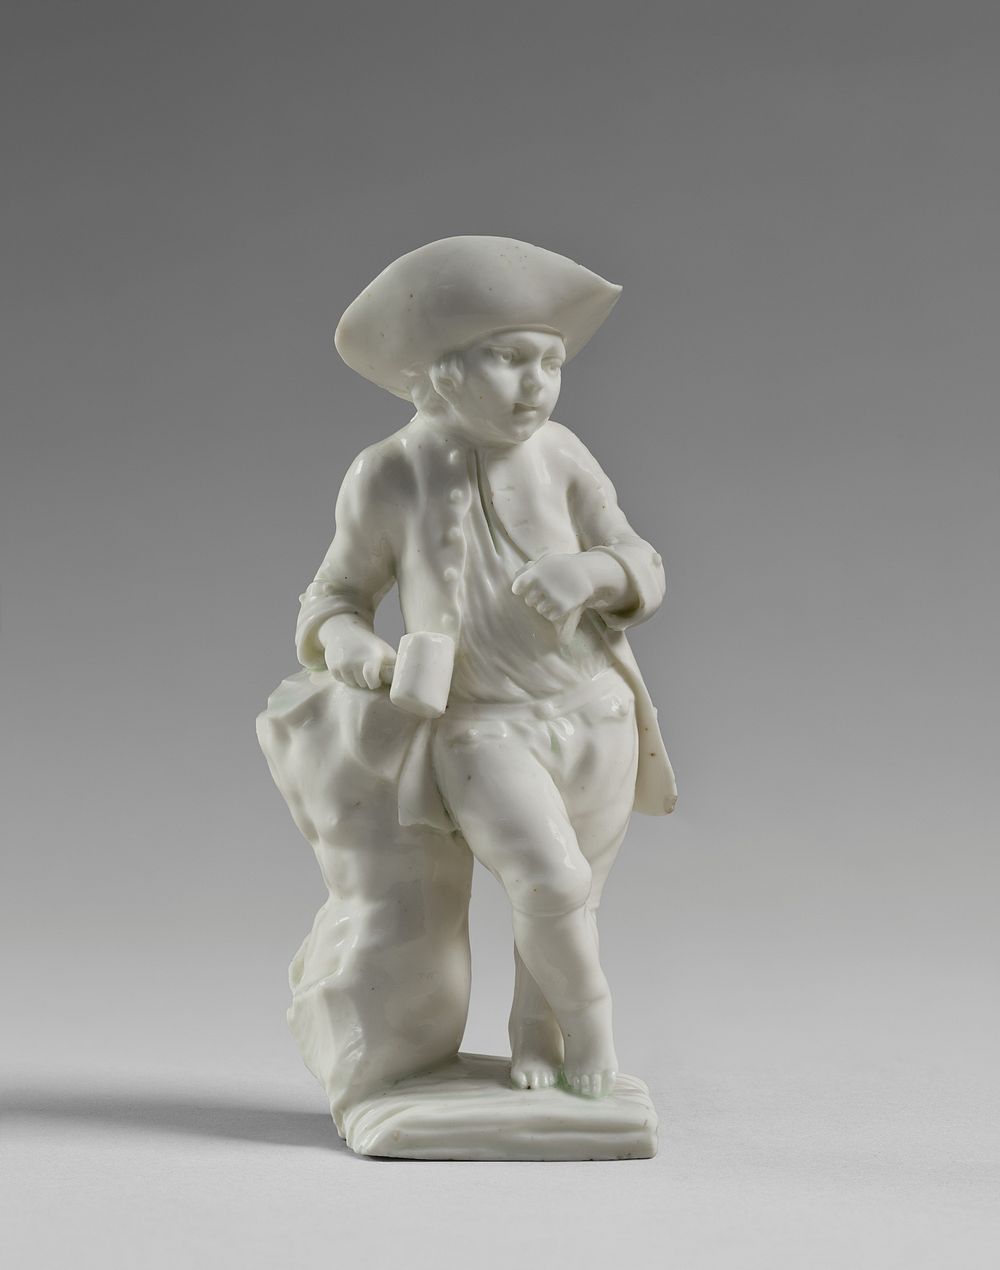 Boy Dressed as a Sculptor by Tournai Manufactory